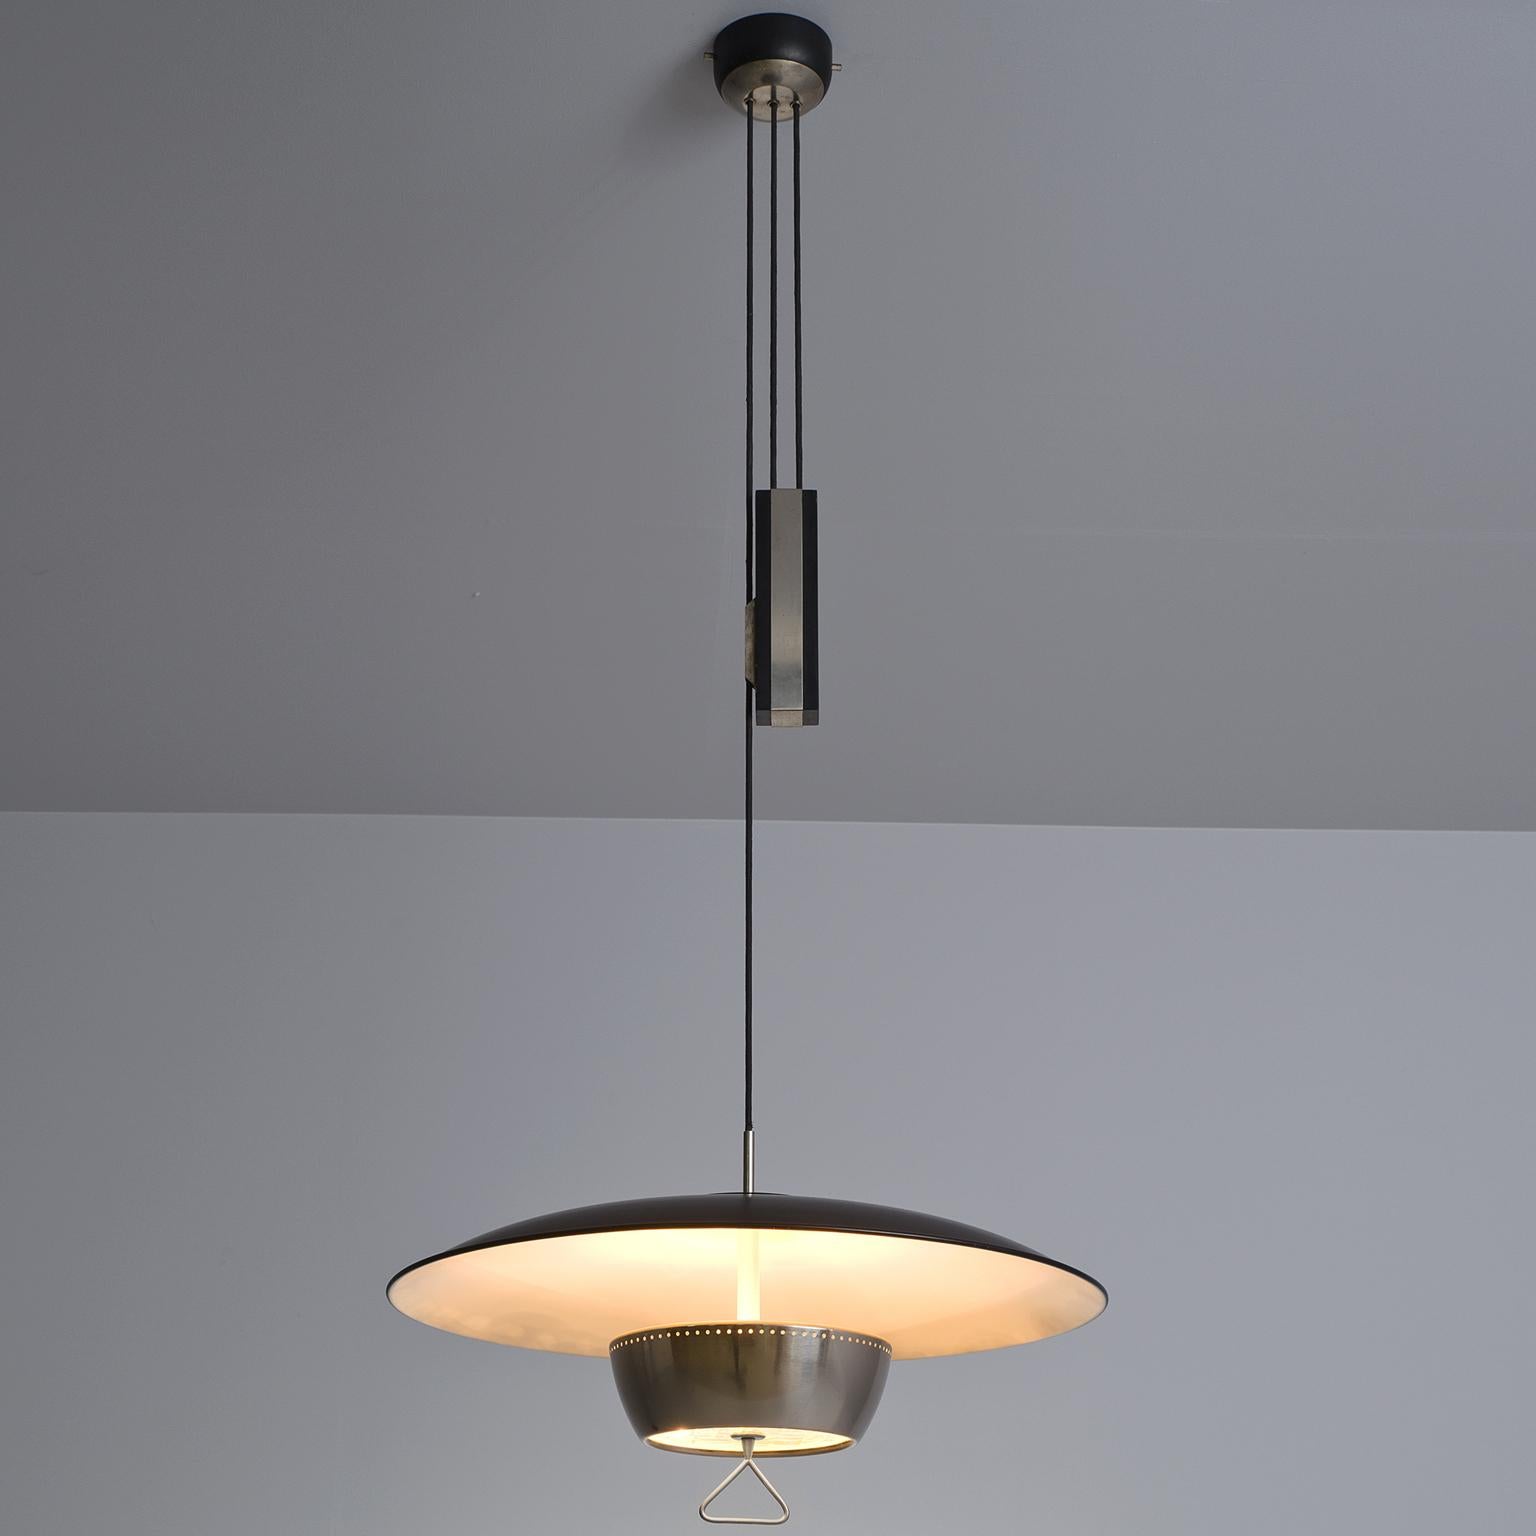 Gaetano Sciolari for Stilnovo, chandelier model 1244, nickel-plated brass, lacquered aluminum, glass, Italy, circa 1950.

Elegant and modern pendant in nickel-plated pendant with black coated shade by Sciolari. Adjustable in height due the